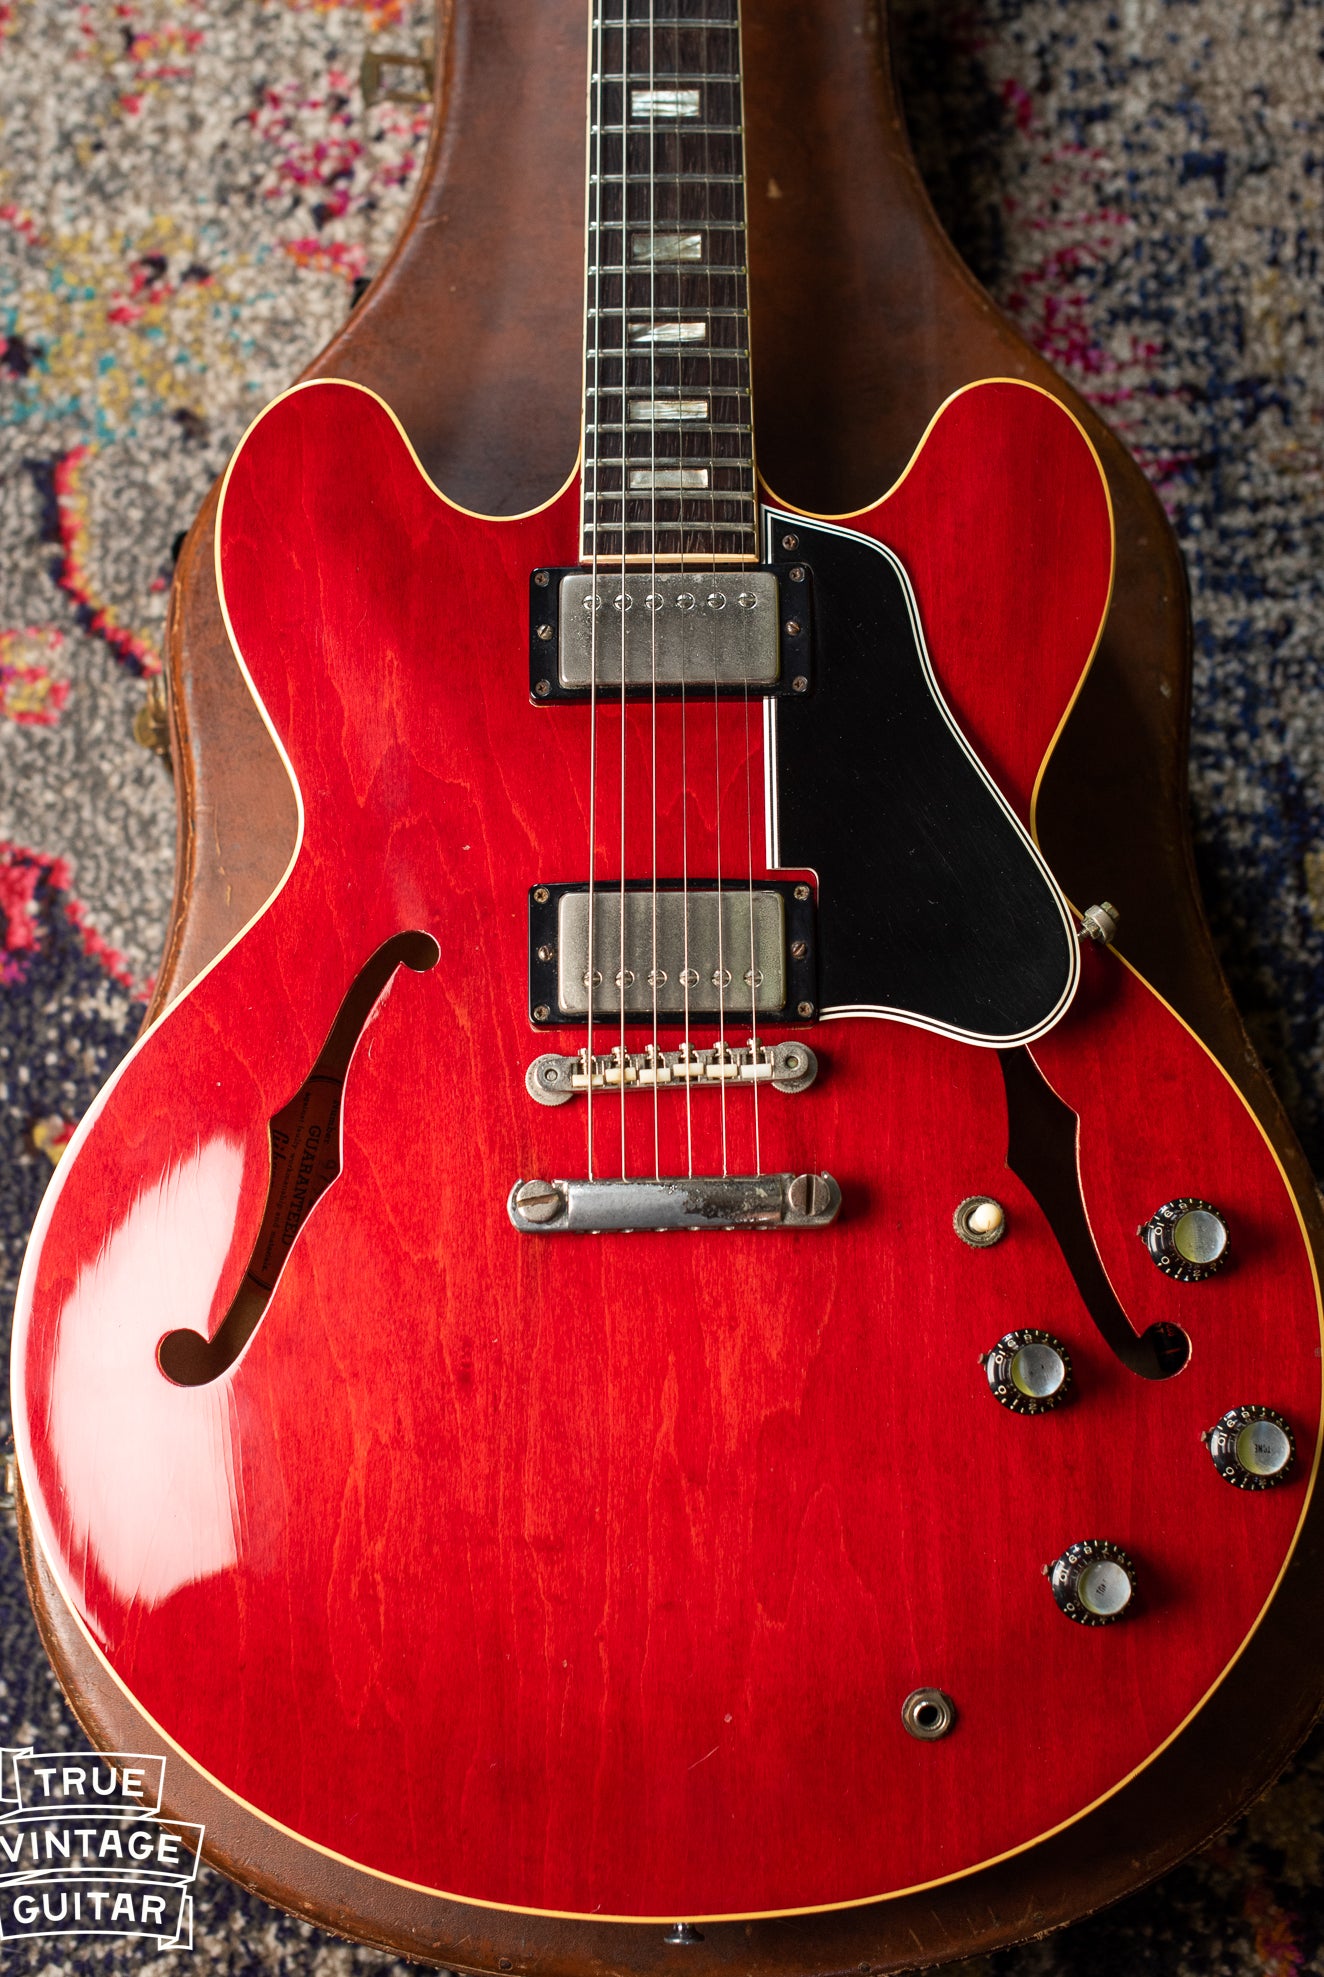 Gibson ES-335 1963 guitar in Cherry Red finish